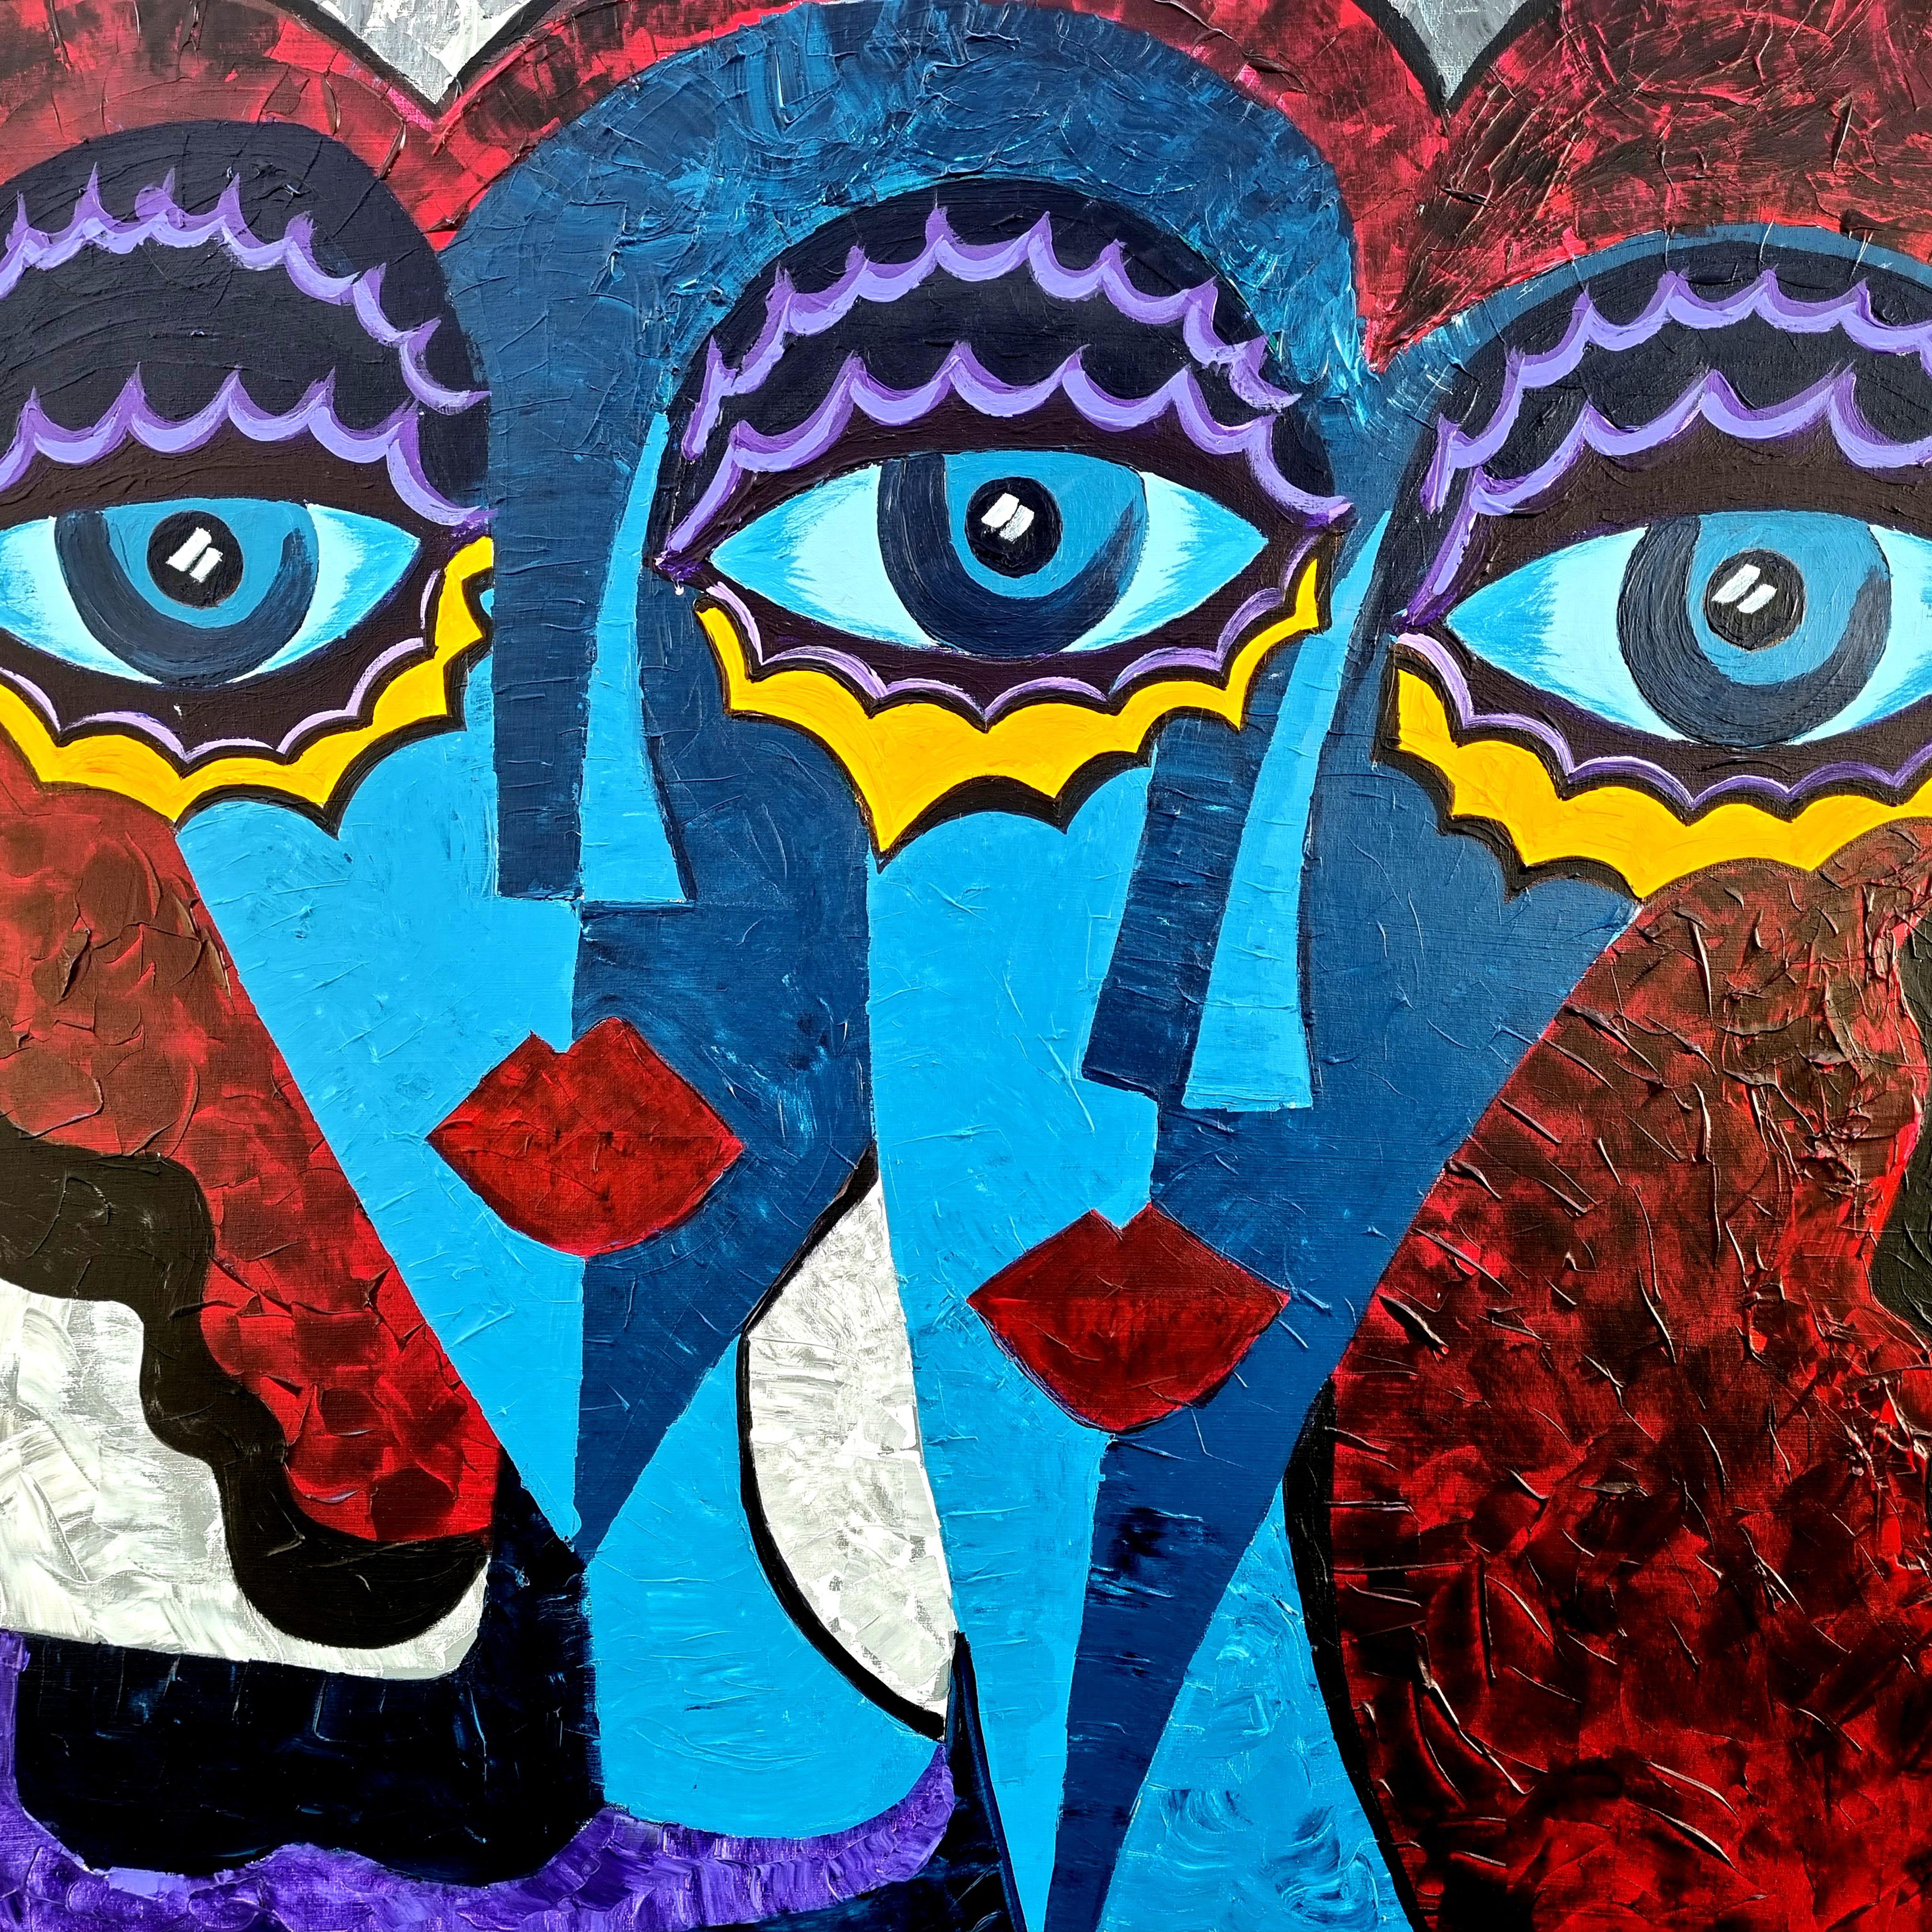  R. Poch. Two Woman Blue  Eyes original acrylic canvas painting - Abstract Expressionist Painting by Ramon Poch